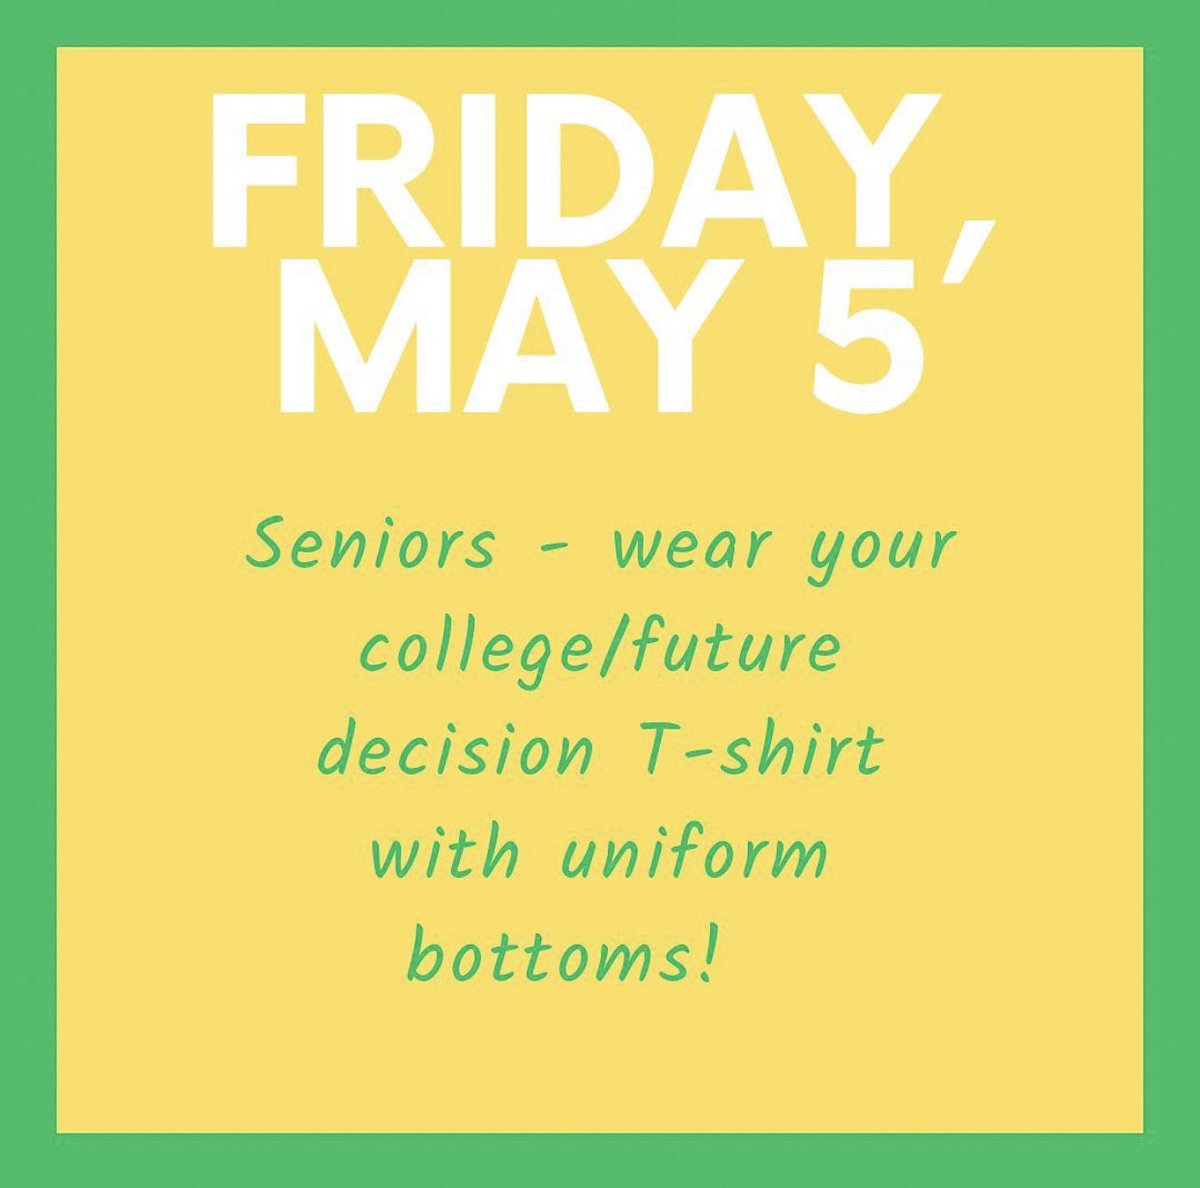 @LCCrusaders seniors don’t forget to wear your college/university tee shirt over your uniform tomorrow #collegedecisionday @Jennife77090497 @annetempleton @AmyHerron @bctesche @LC_STEM